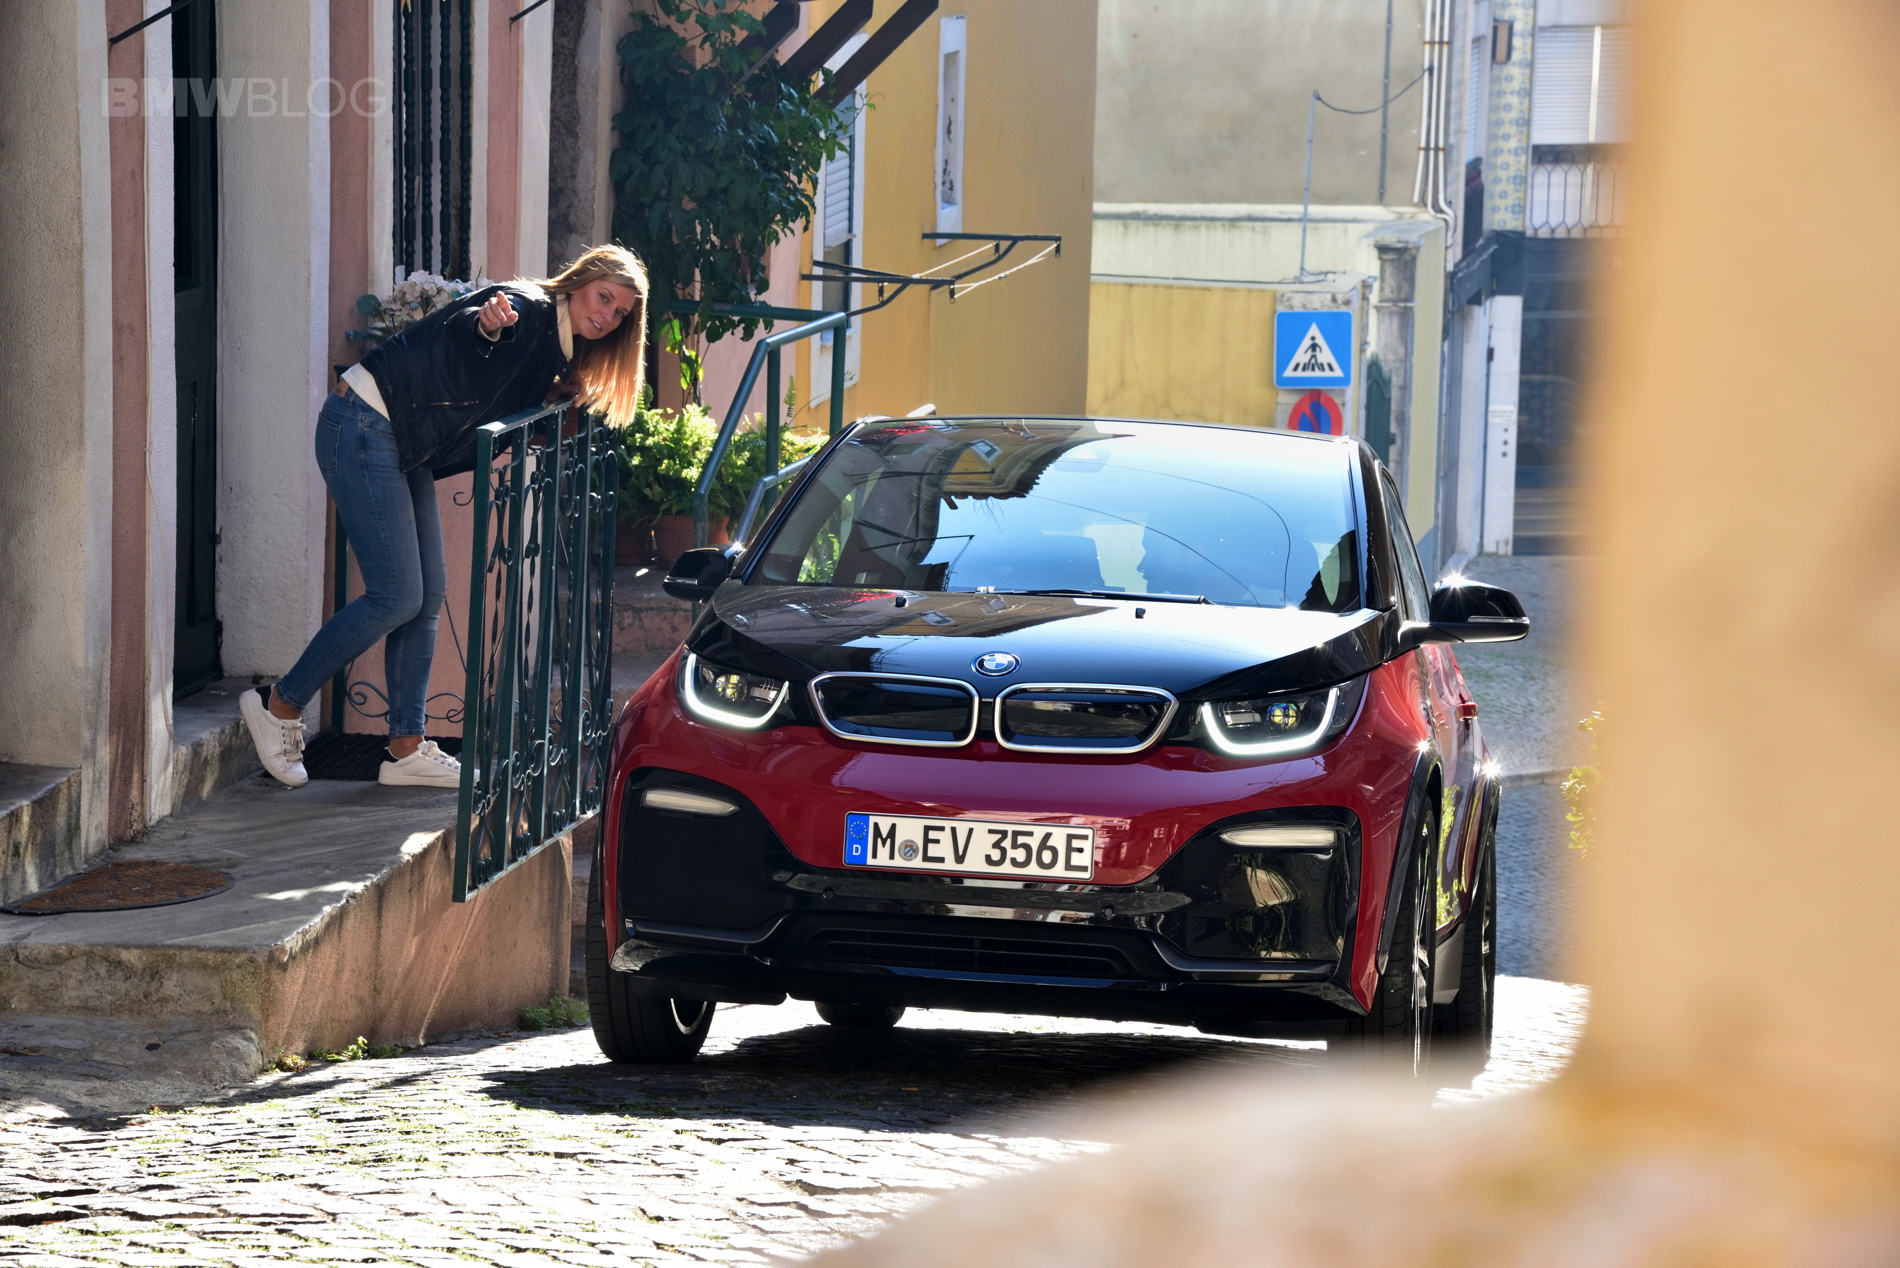 BMW Sells Over 165,000 Units Of i3 electric car In 6 Years